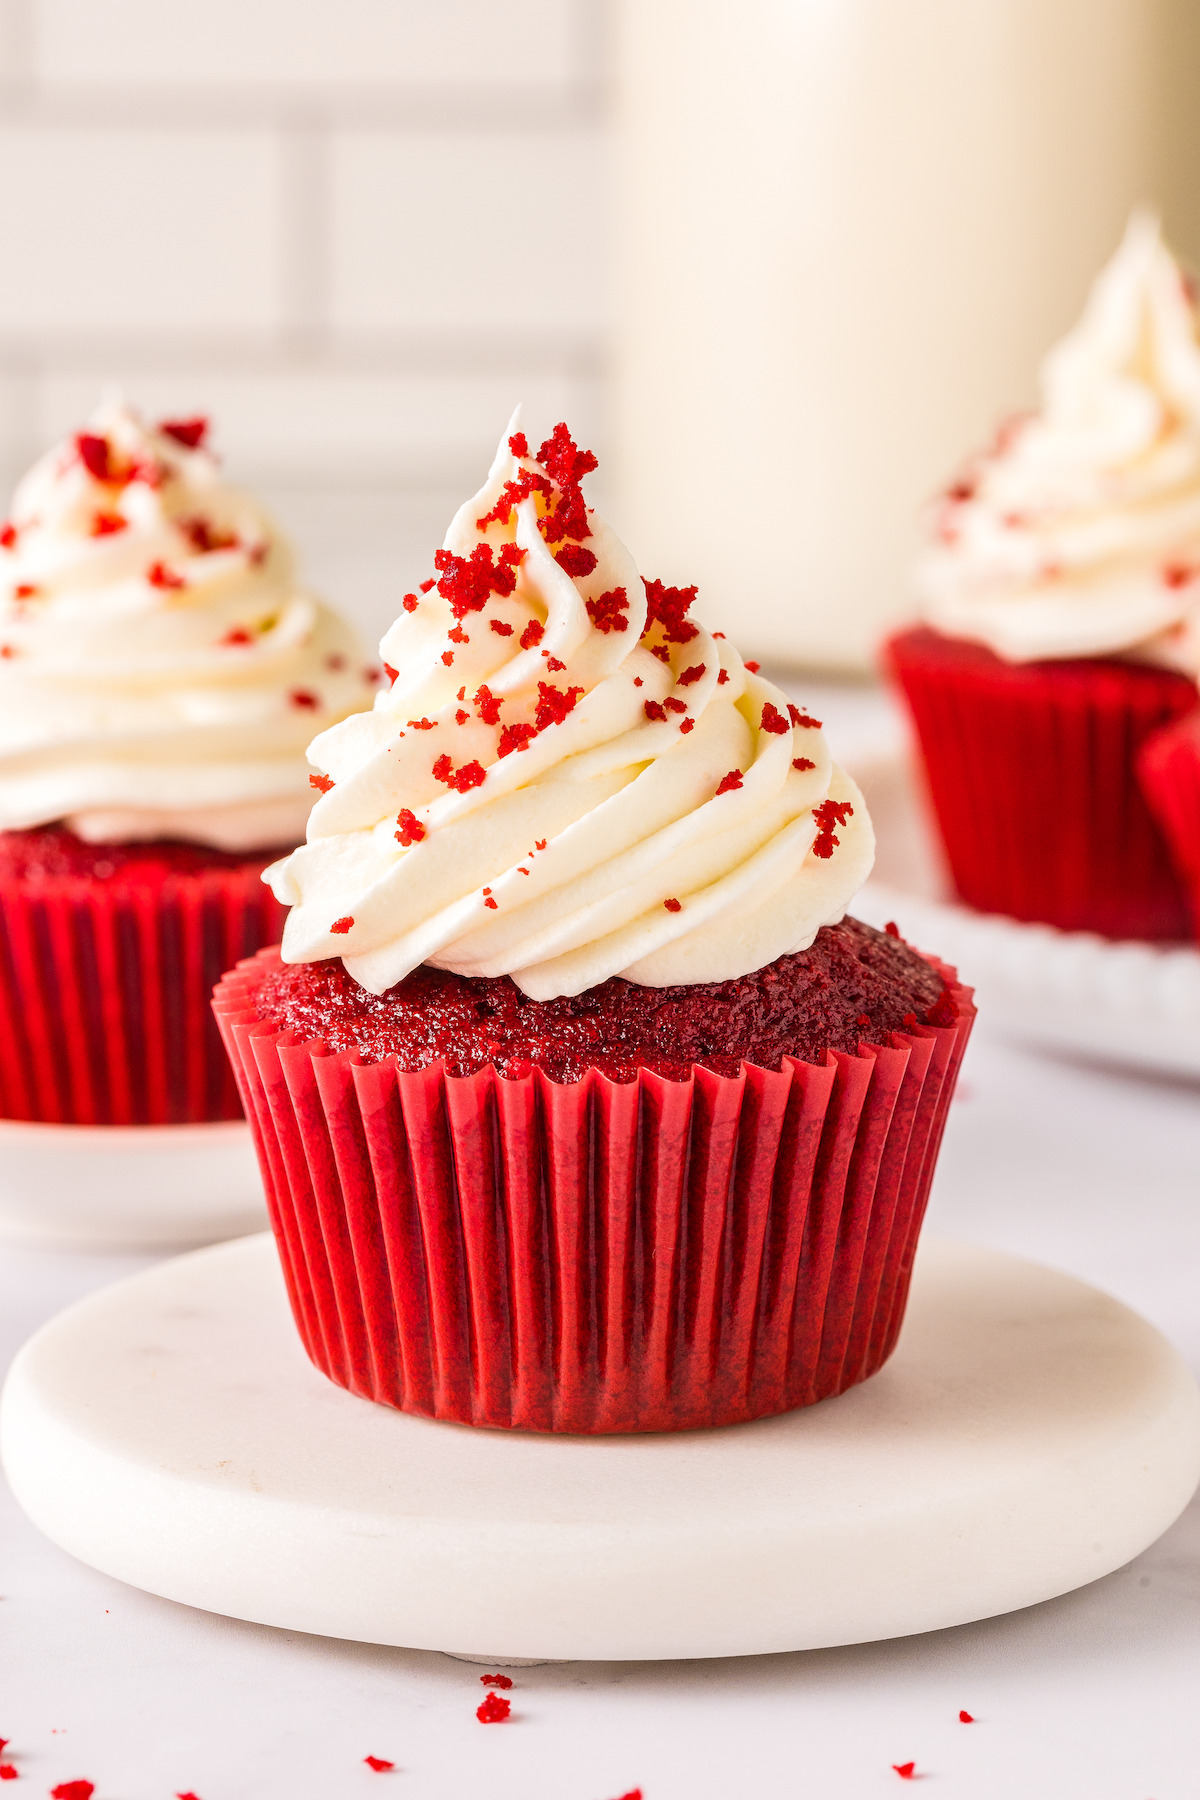 Frosted cupcakes with red velvet crumbs on top.